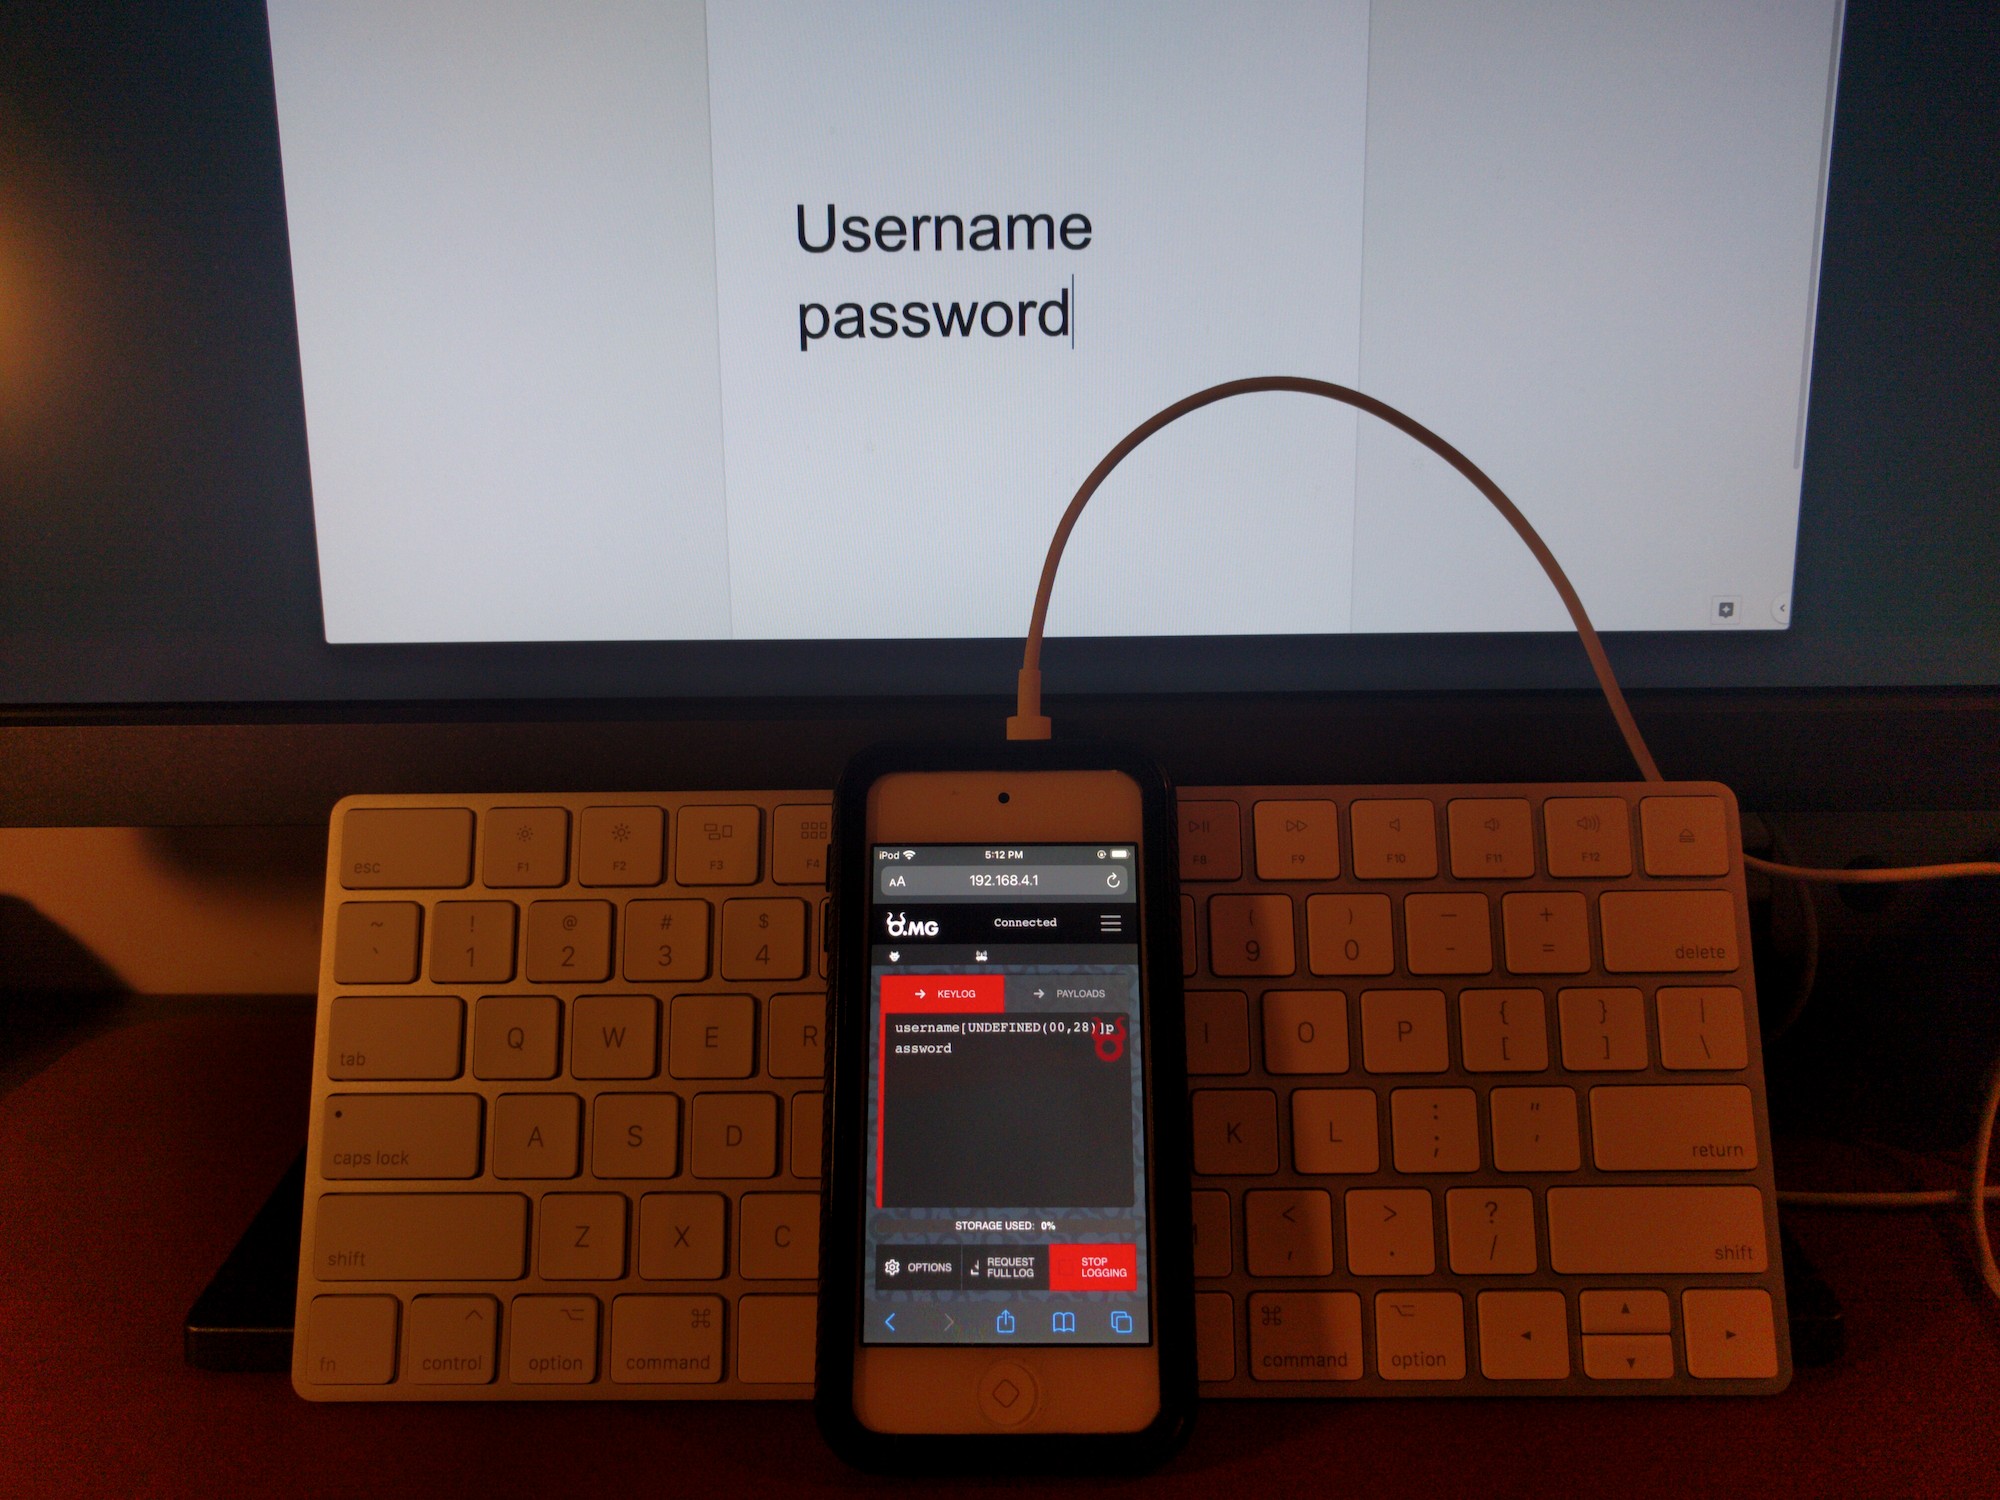 This hacker's iPhone charging cable can hijack your computer